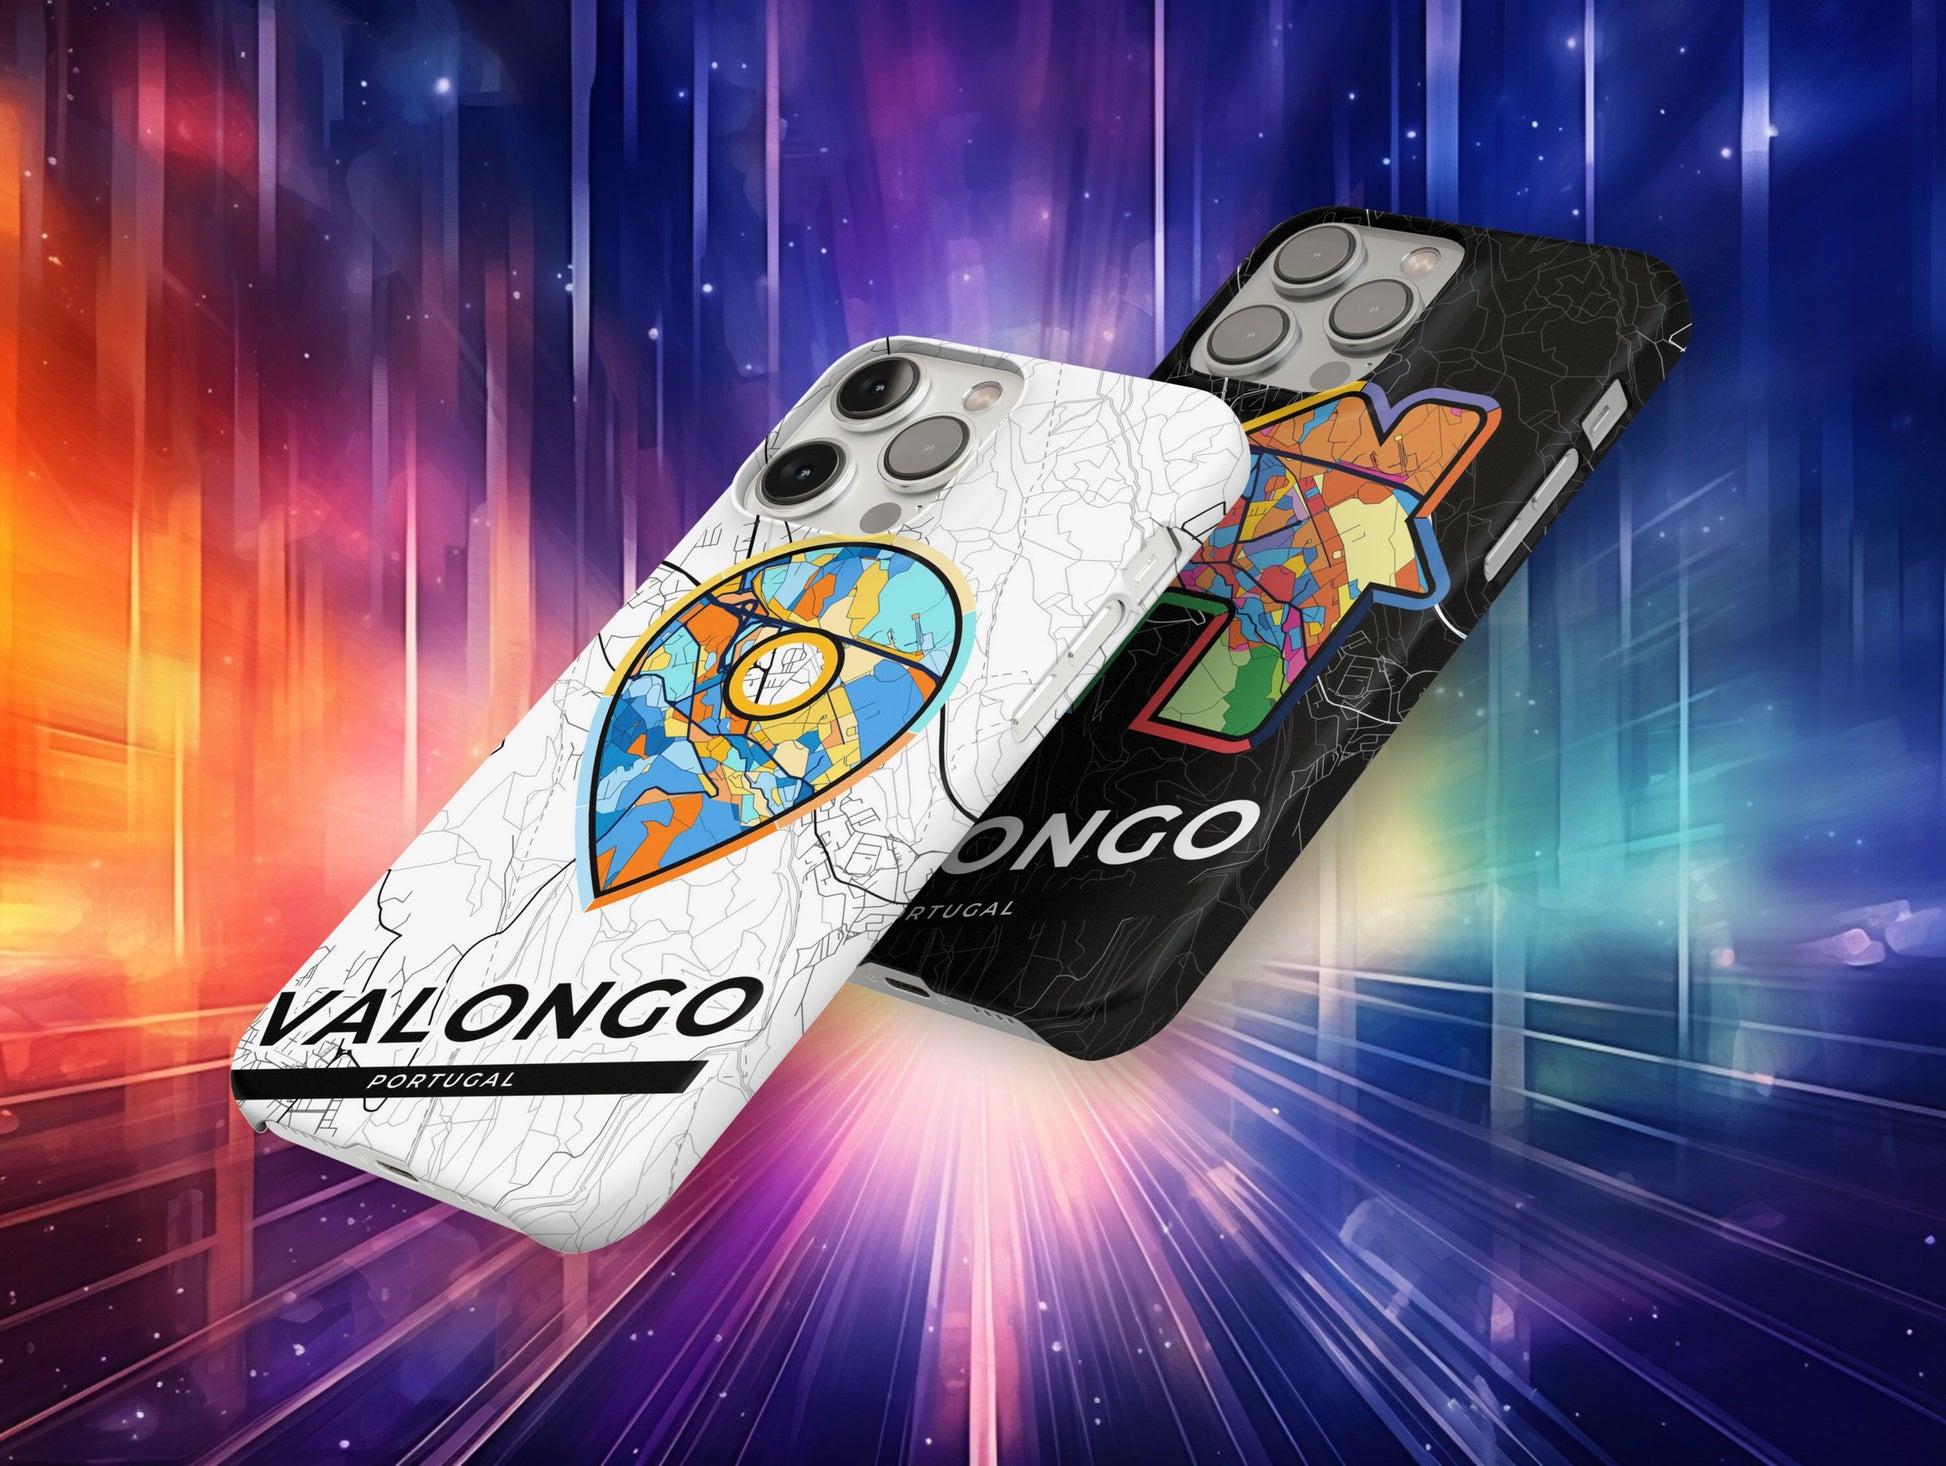 Valongo Portugal slim phone case with colorful icon